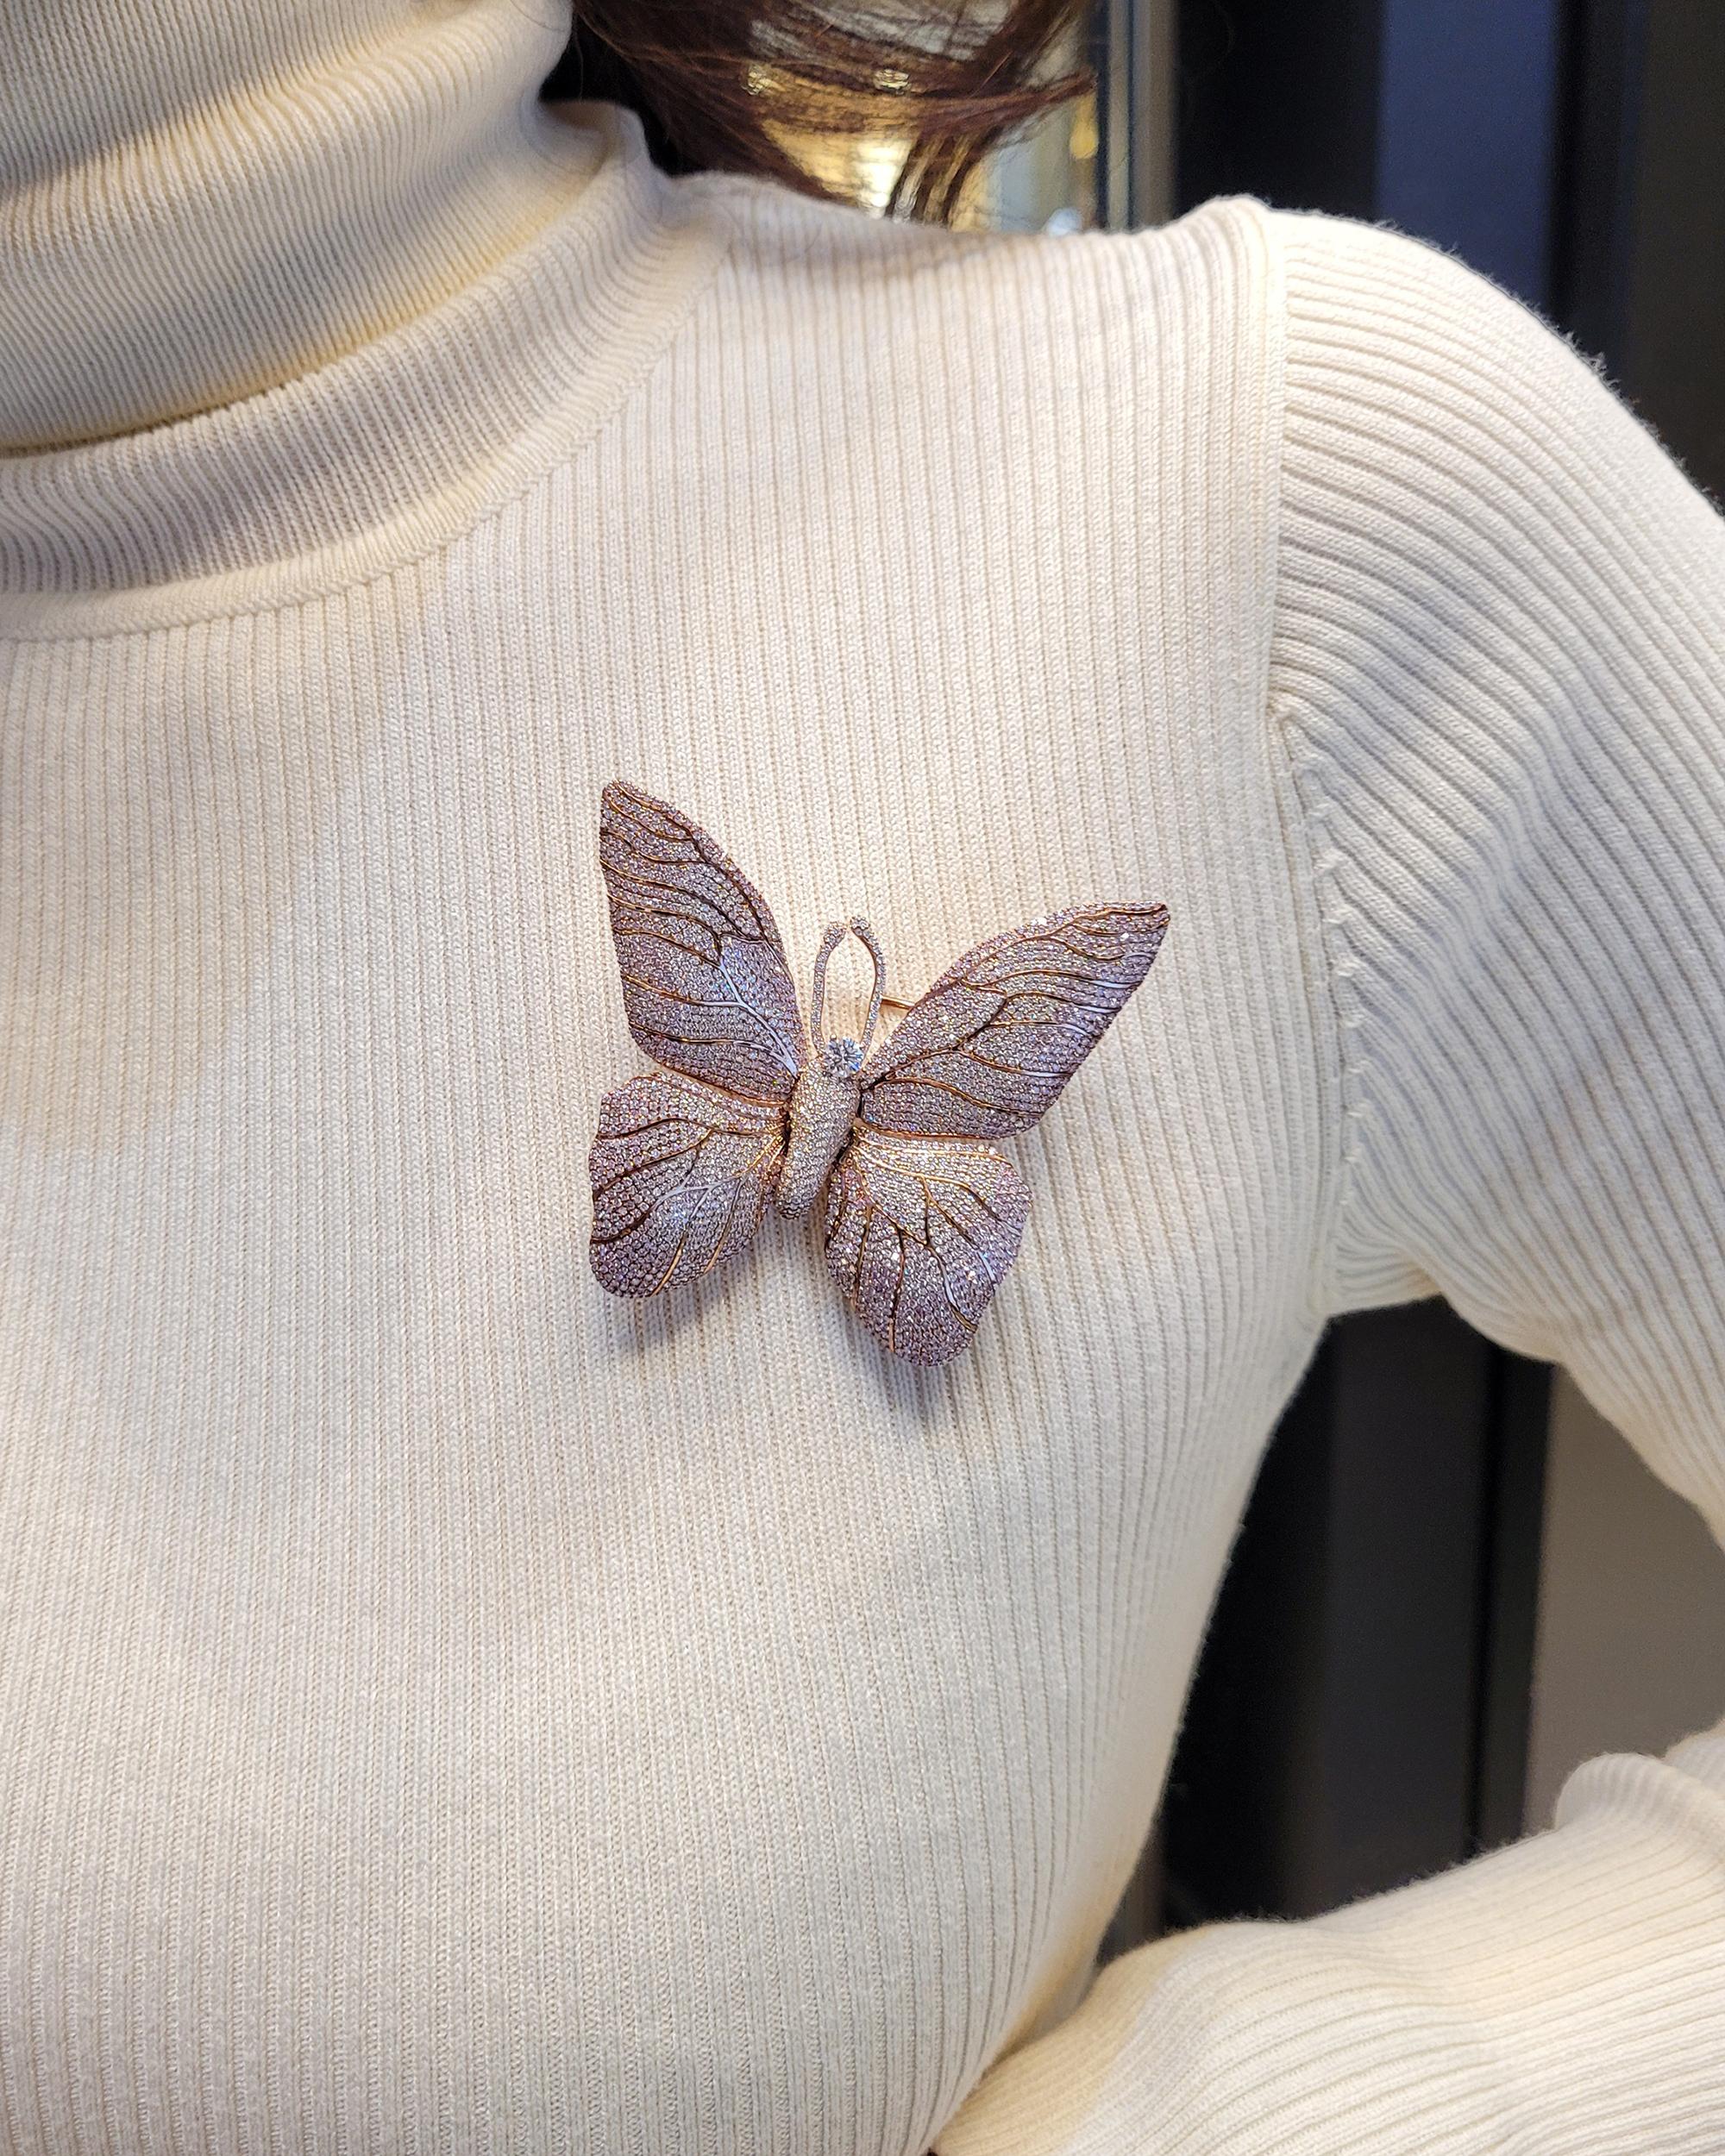 A butterfly brooch made 'en tremblant' with white and pink diamonds, by Spectra Fine Jewelry.
817 white diamonds weighing 3.46 carats. 
928 pink diamonds weighing 4.15 carats.
Metal is 18k rose gold, gross weight is 33.05 g.
Measurements:
W: 2.5